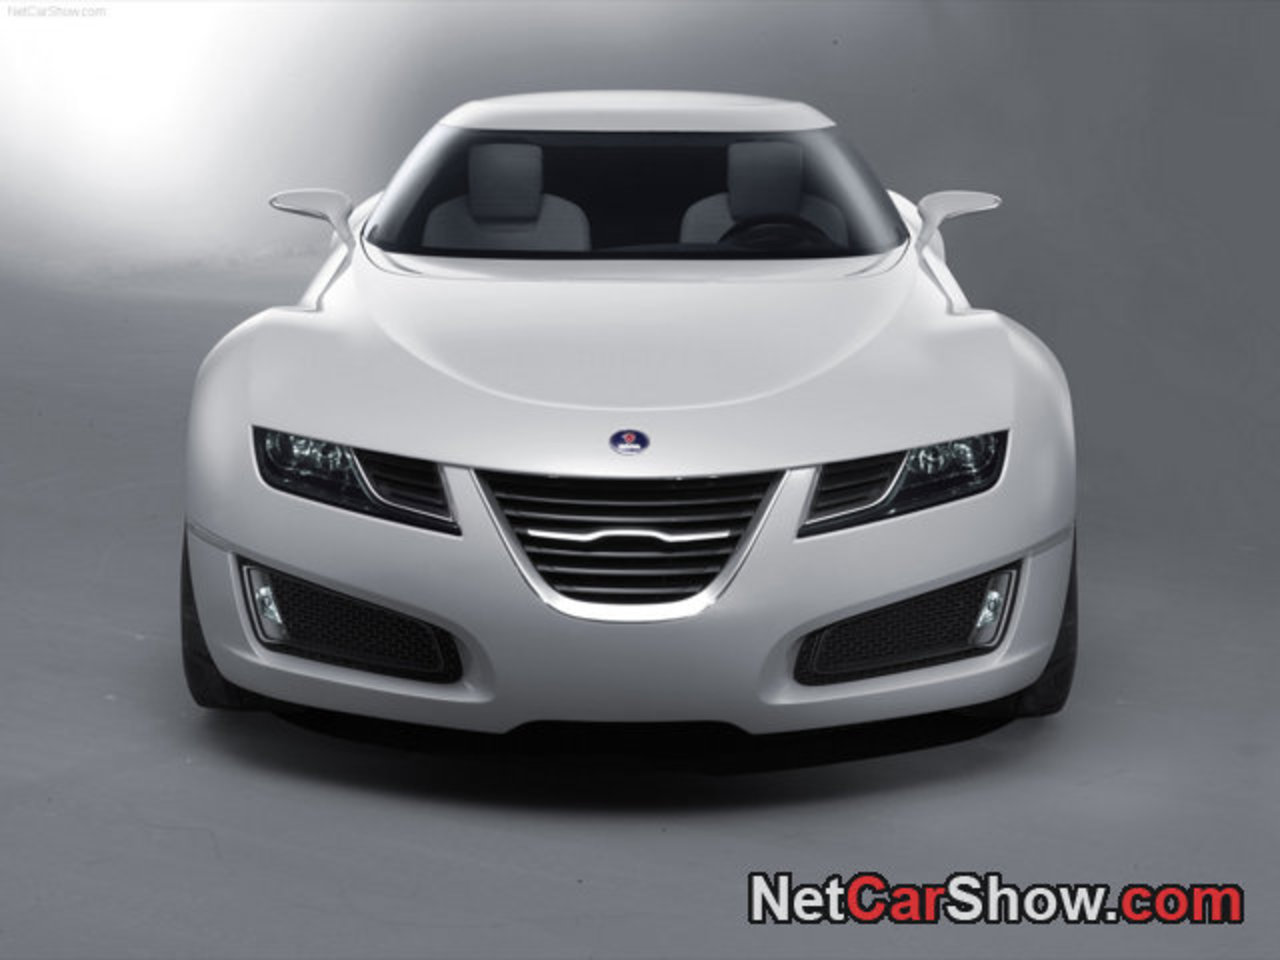 Saab Aero X Concept picture # 04 of 34, Front, MY 2006, 800x600